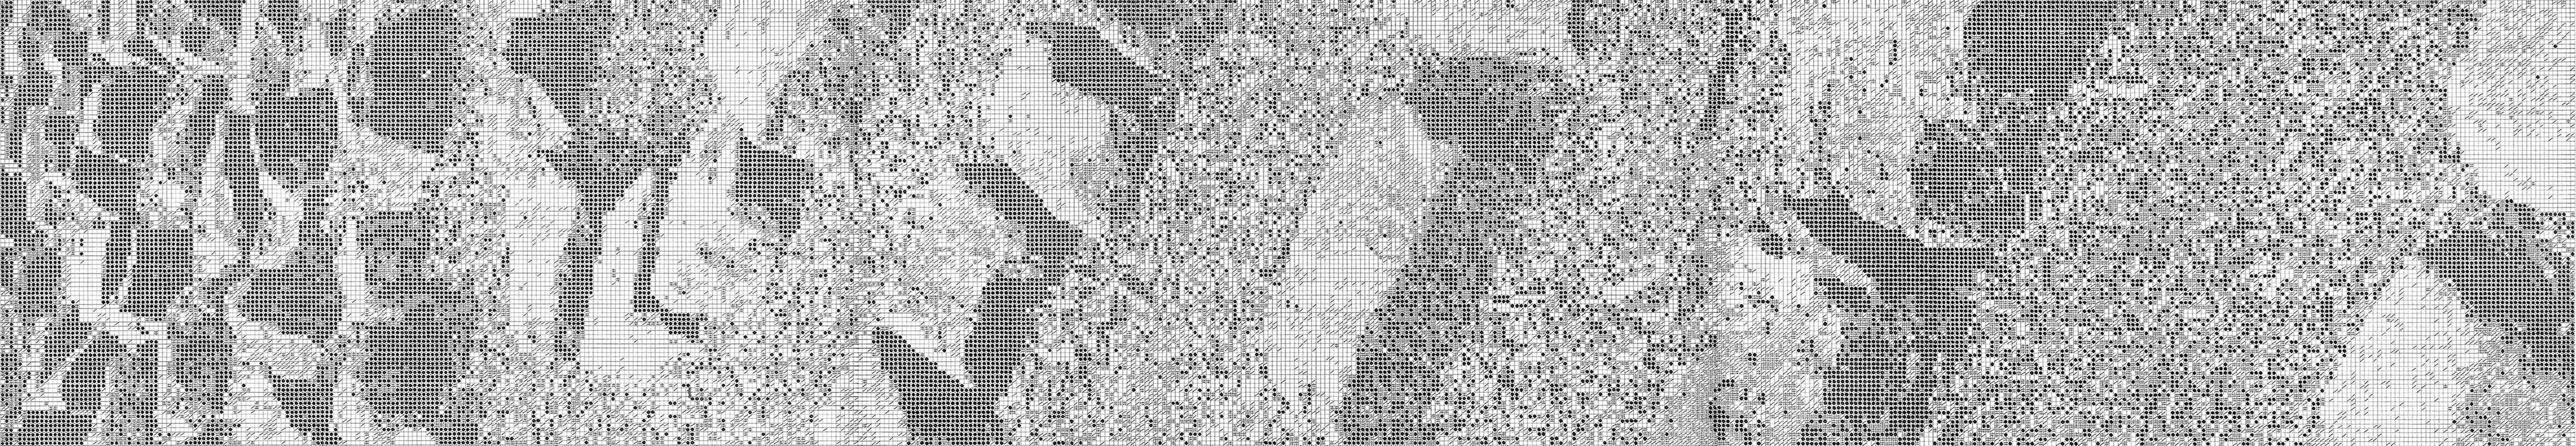 A textured grey artwork made of small pixels.